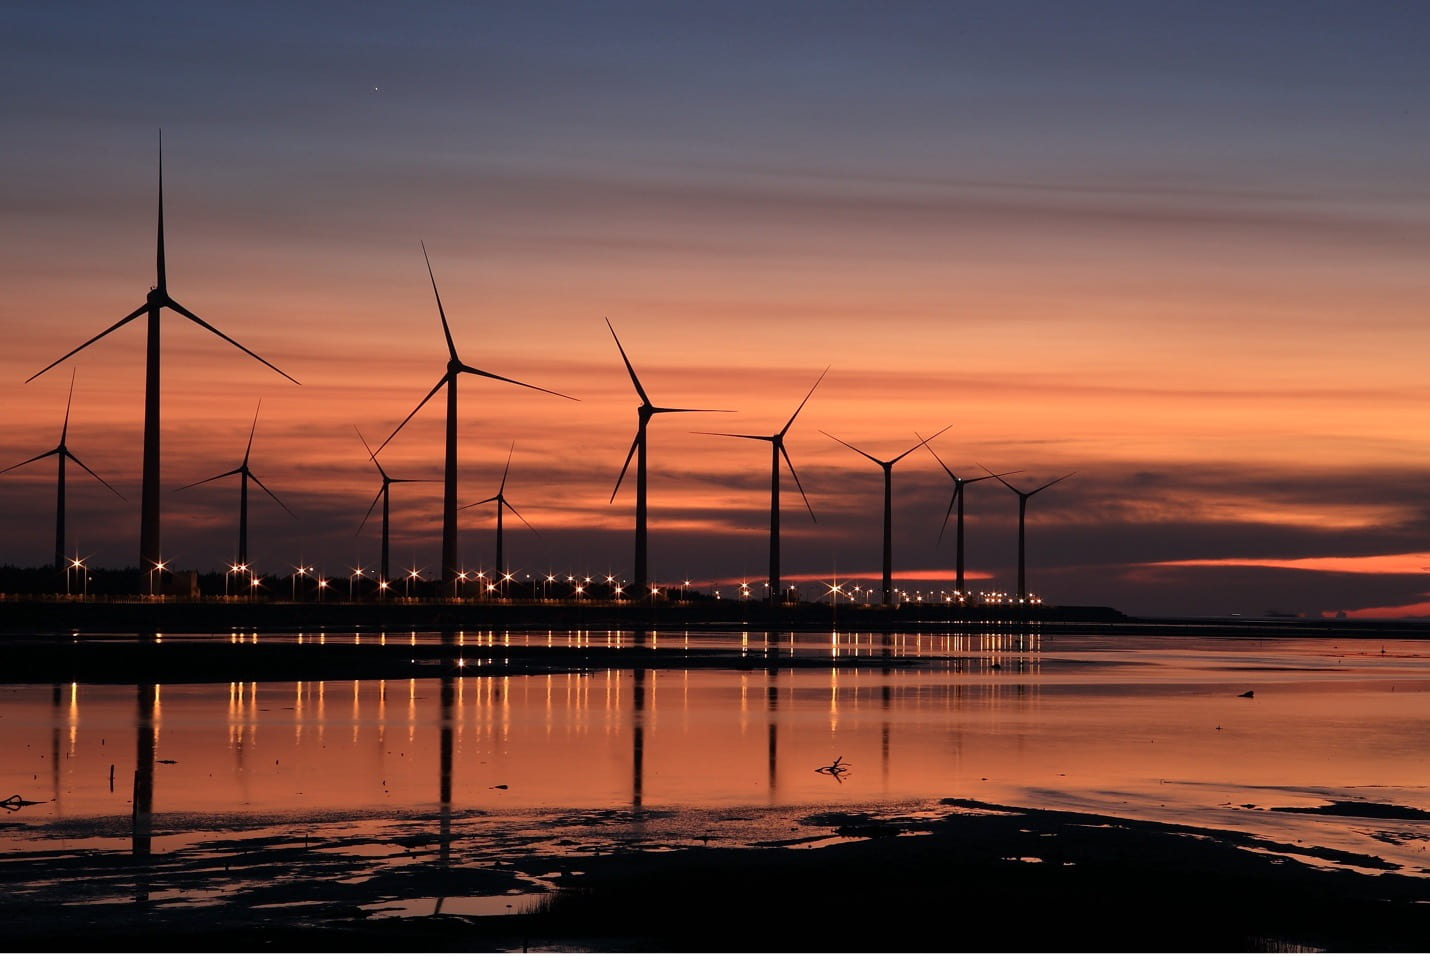 View of windmills at dusk